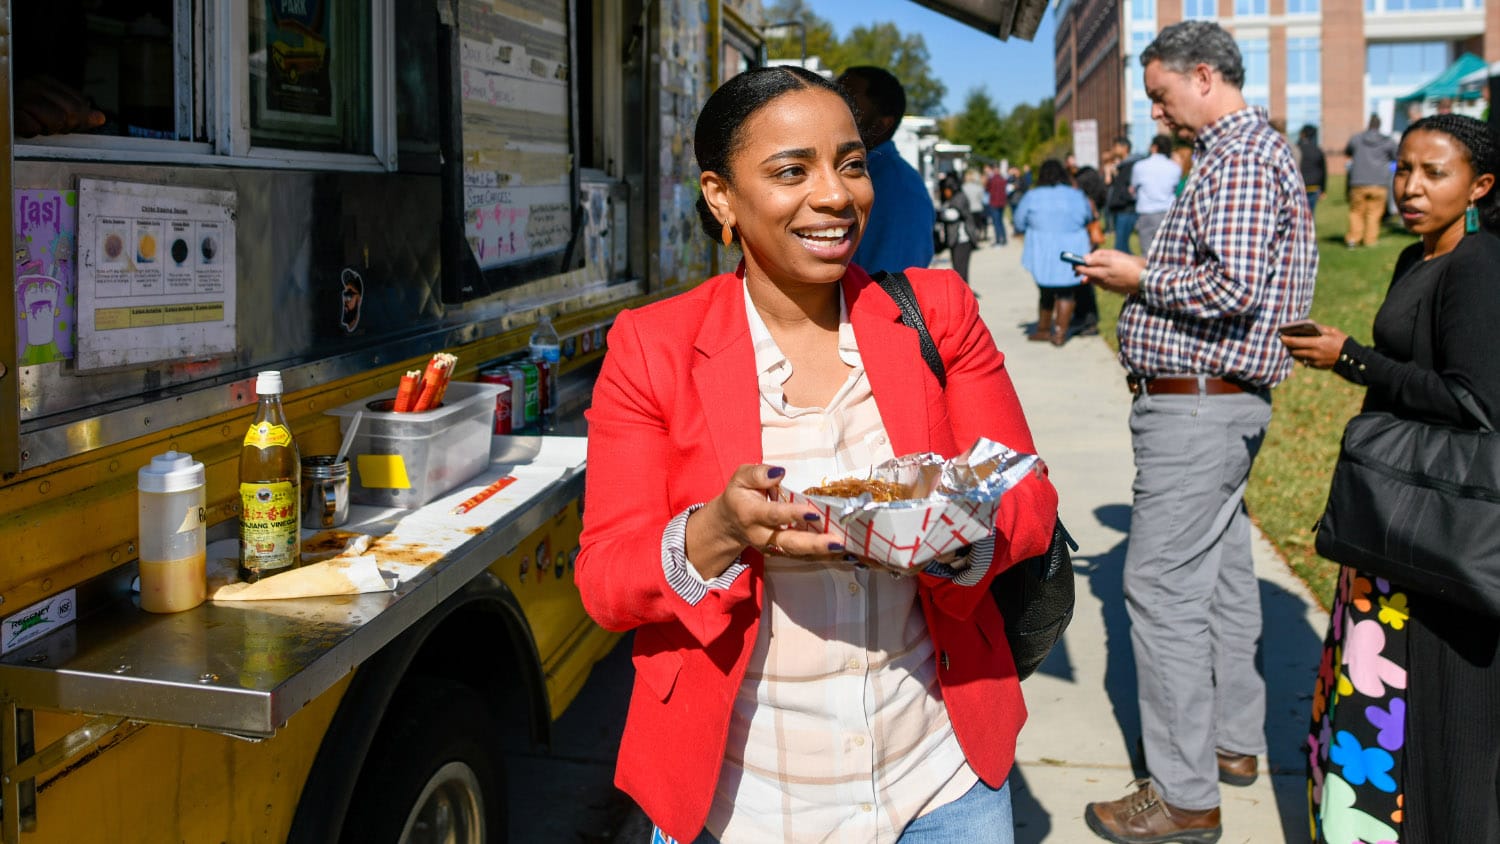 A woman smiles with a plate of food at a food truck rodea